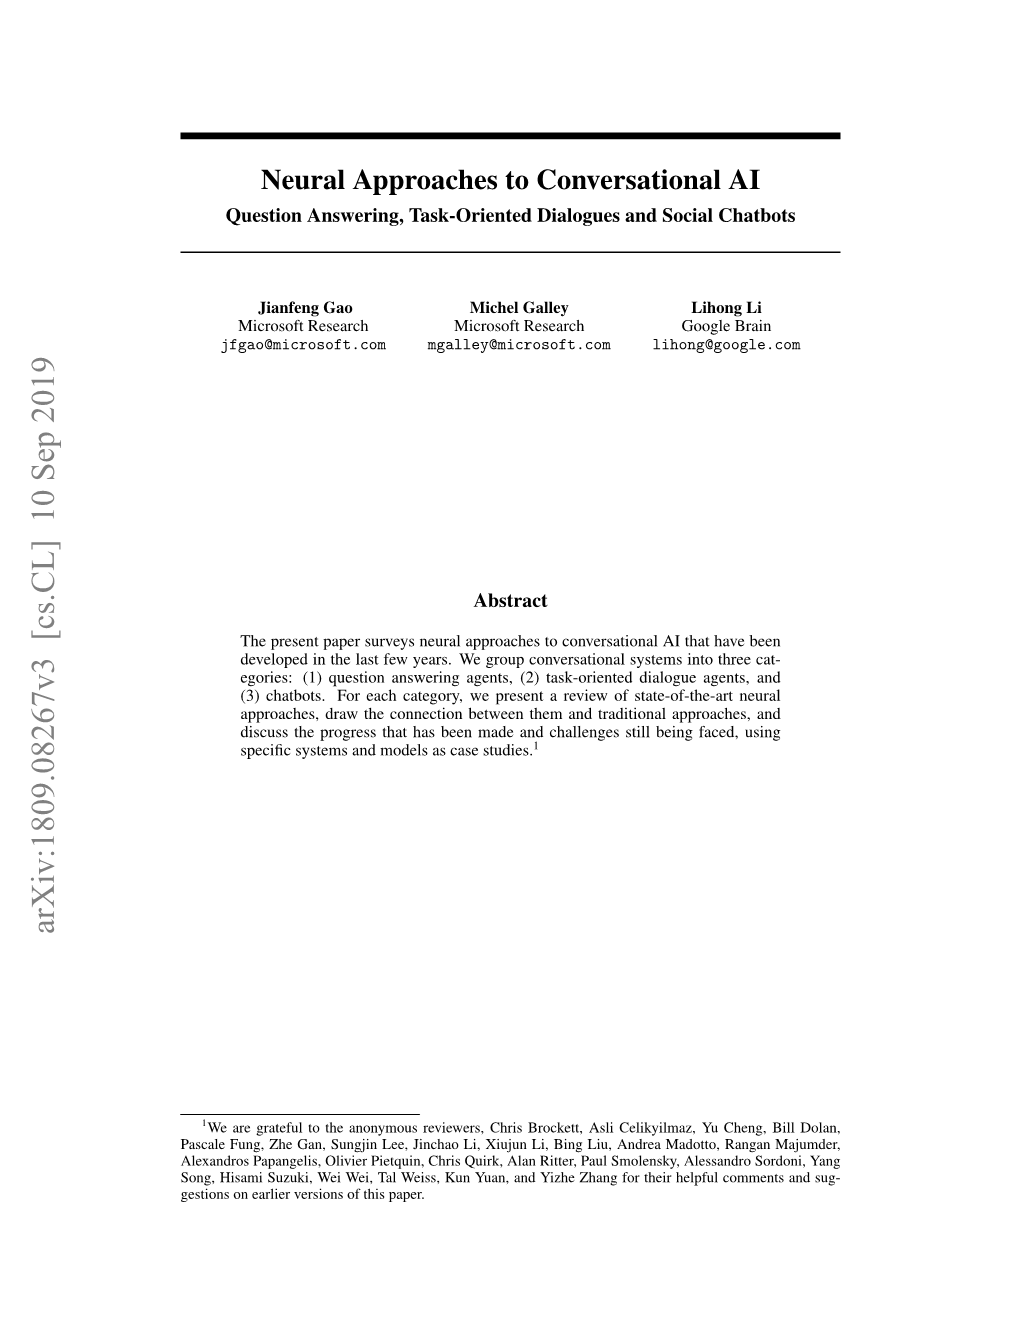 Neural Approaches to Conversational AI Question Answering, Task-Oriented Dialogues and Social Chatbots